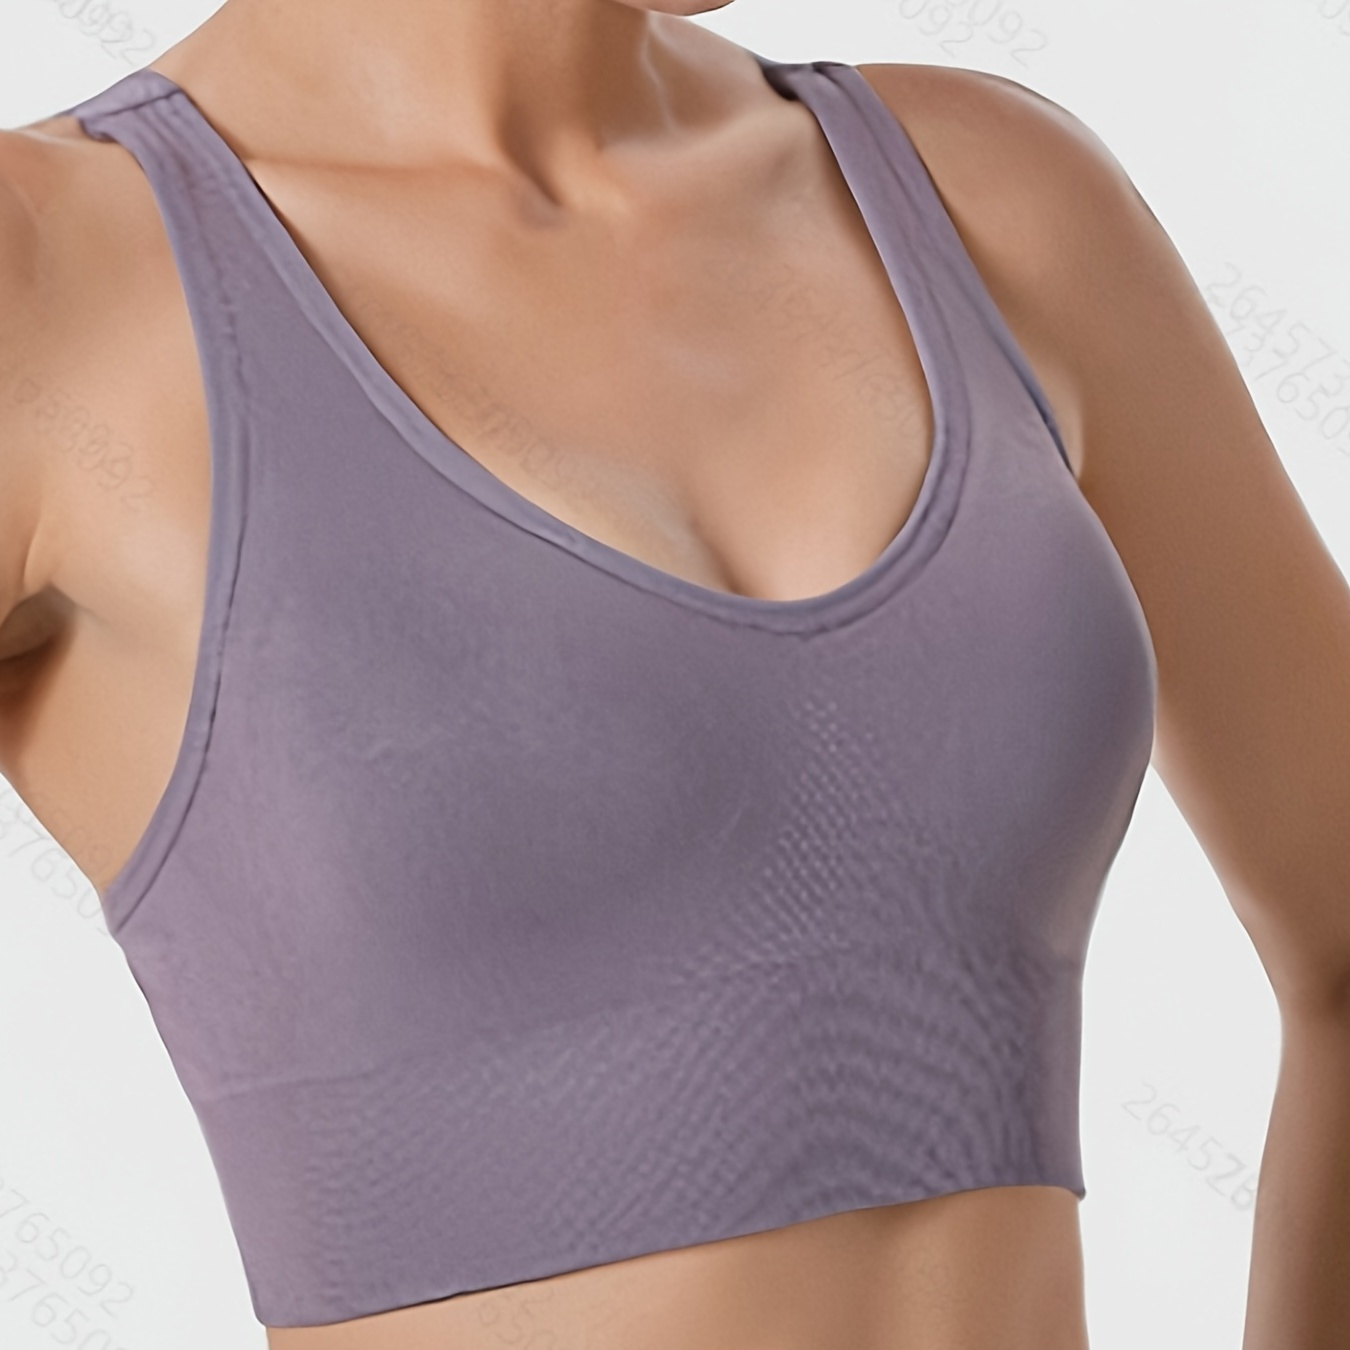 Women's Seamless Sports Bra with Criss Cross Back for Yoga and Fitness